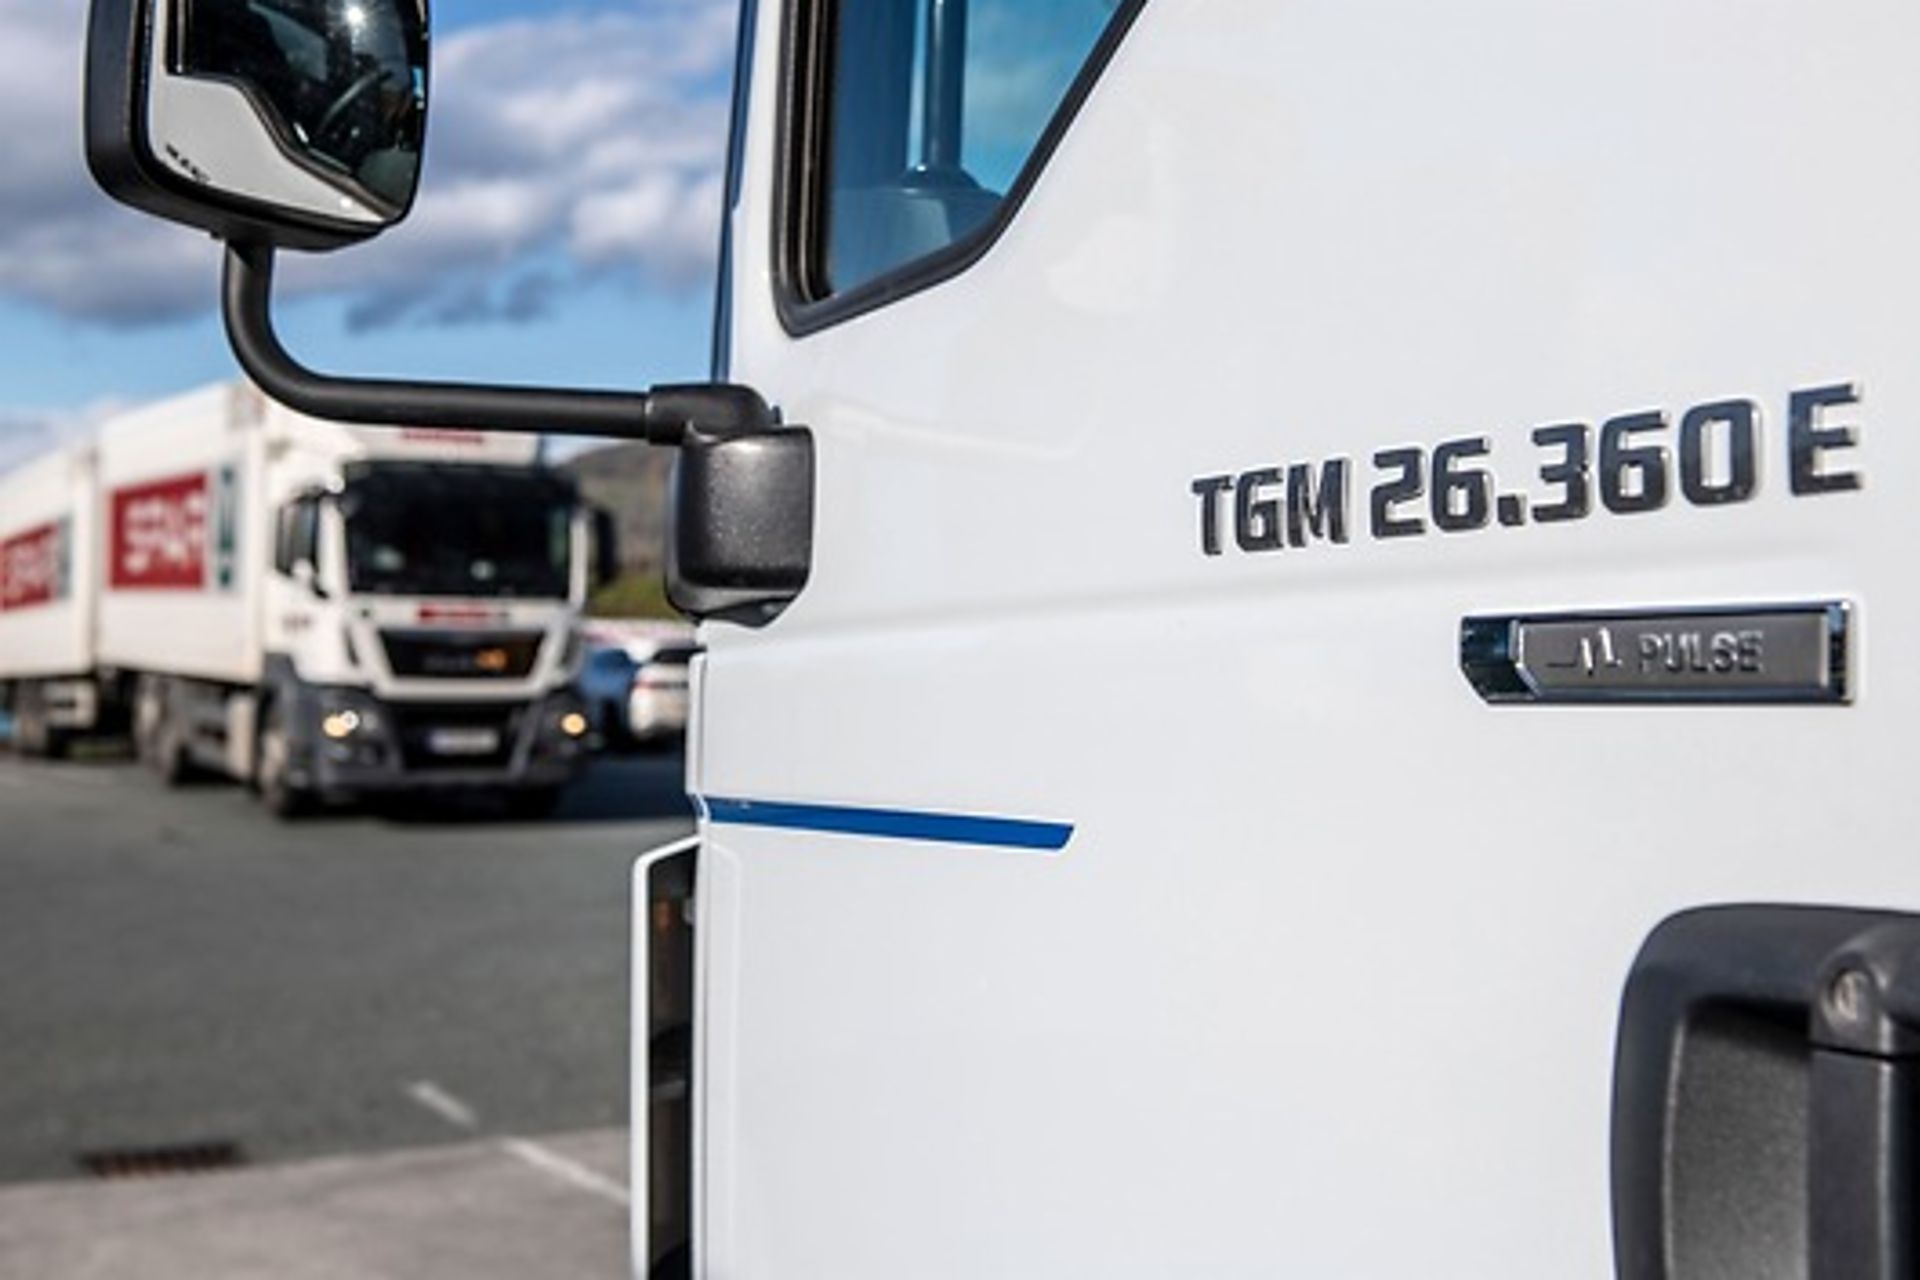 Visually, the fully electric 26 tonne truck is almost identical to it’s diesel-powered “colleagues”, just the E on the type plate gives away the difference.